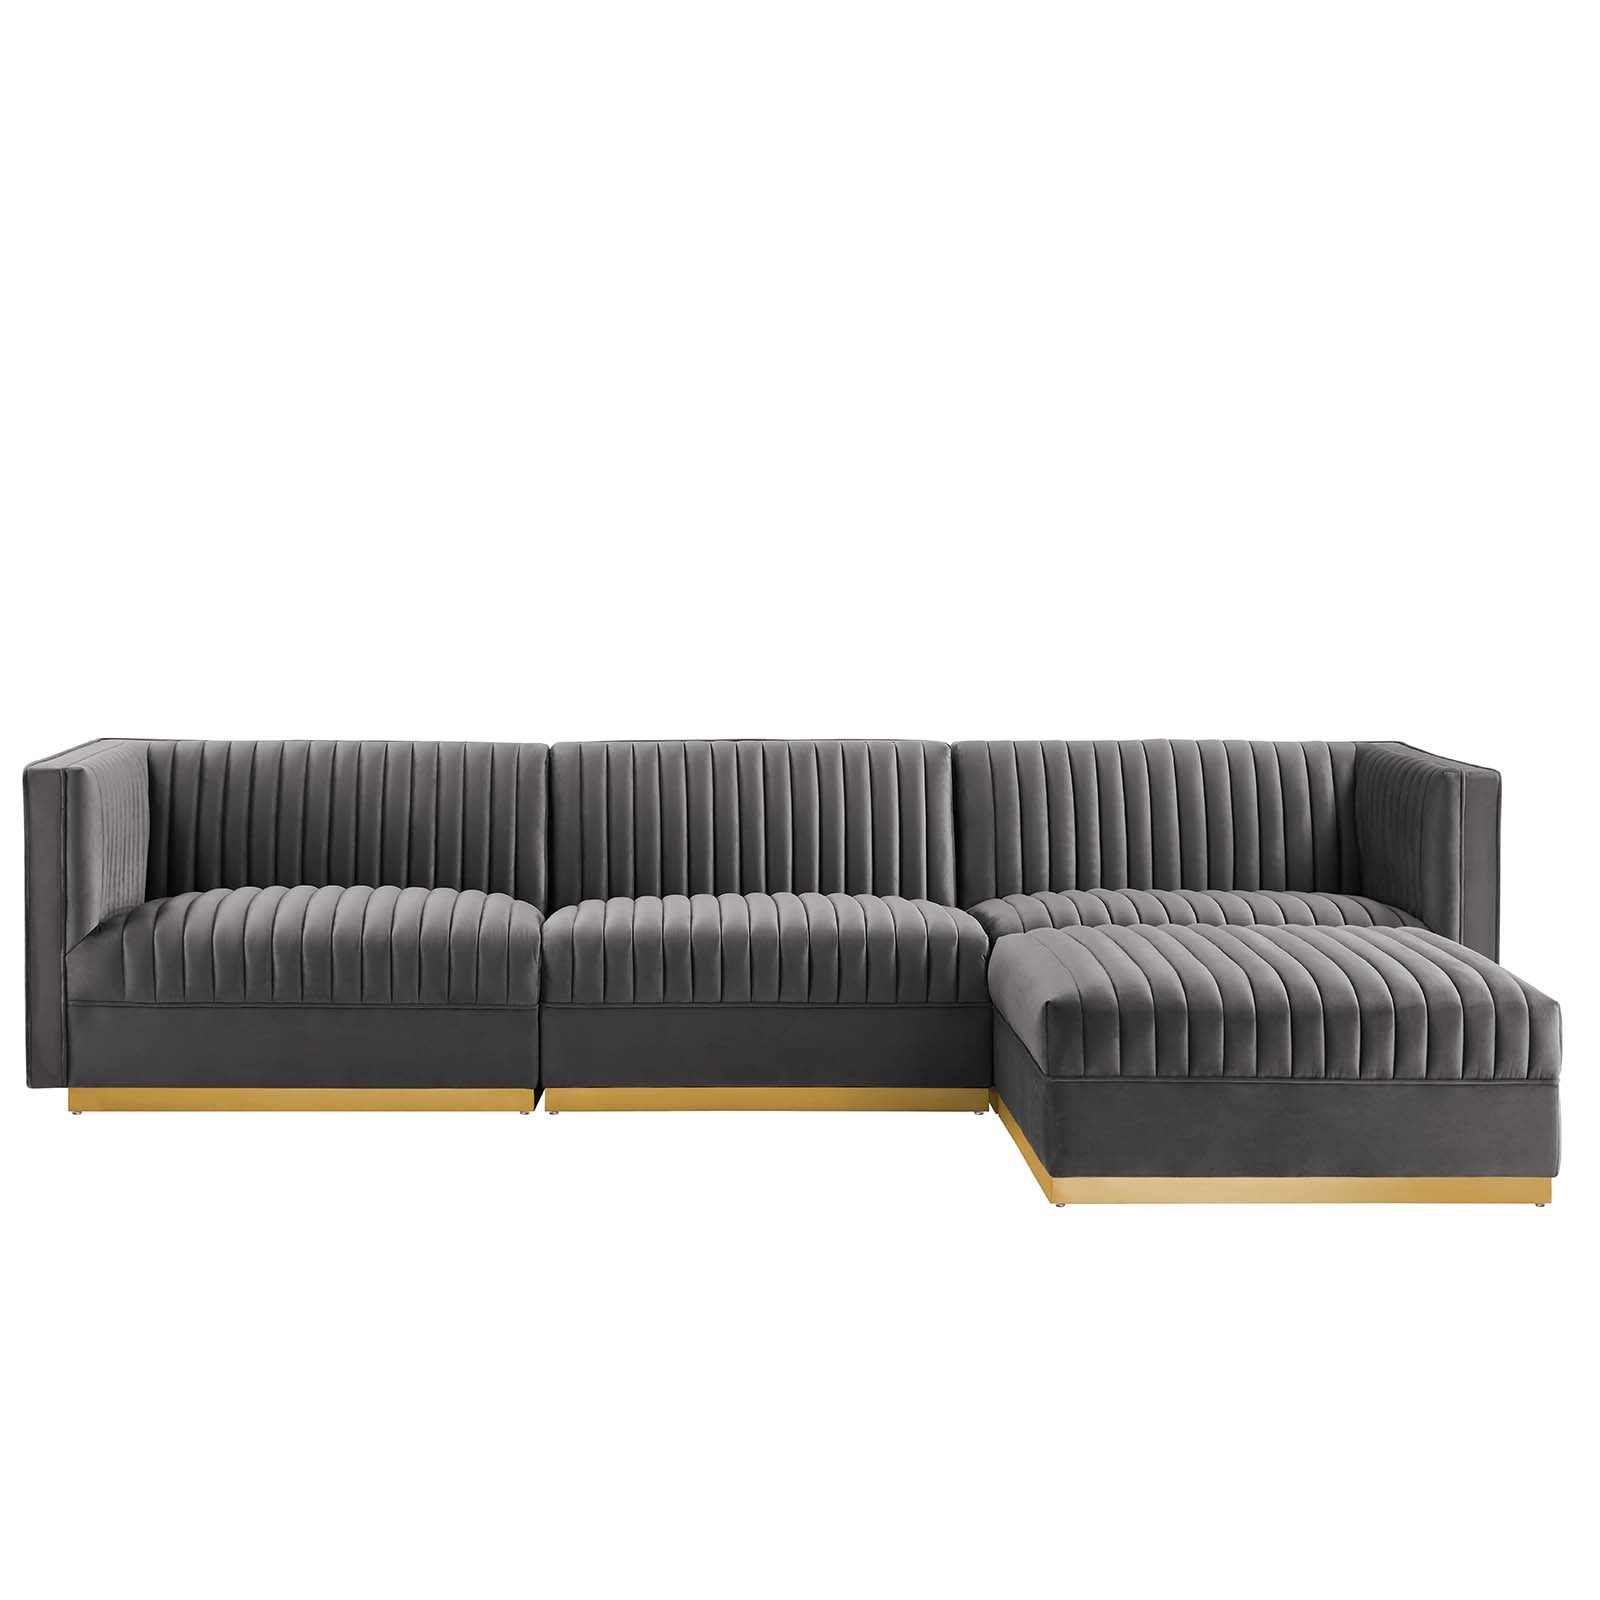 Modway Sectional Sofas - Sanguine Channel Tufted Performance Velvet 4 Piece Modular Sectional Sofa Gray